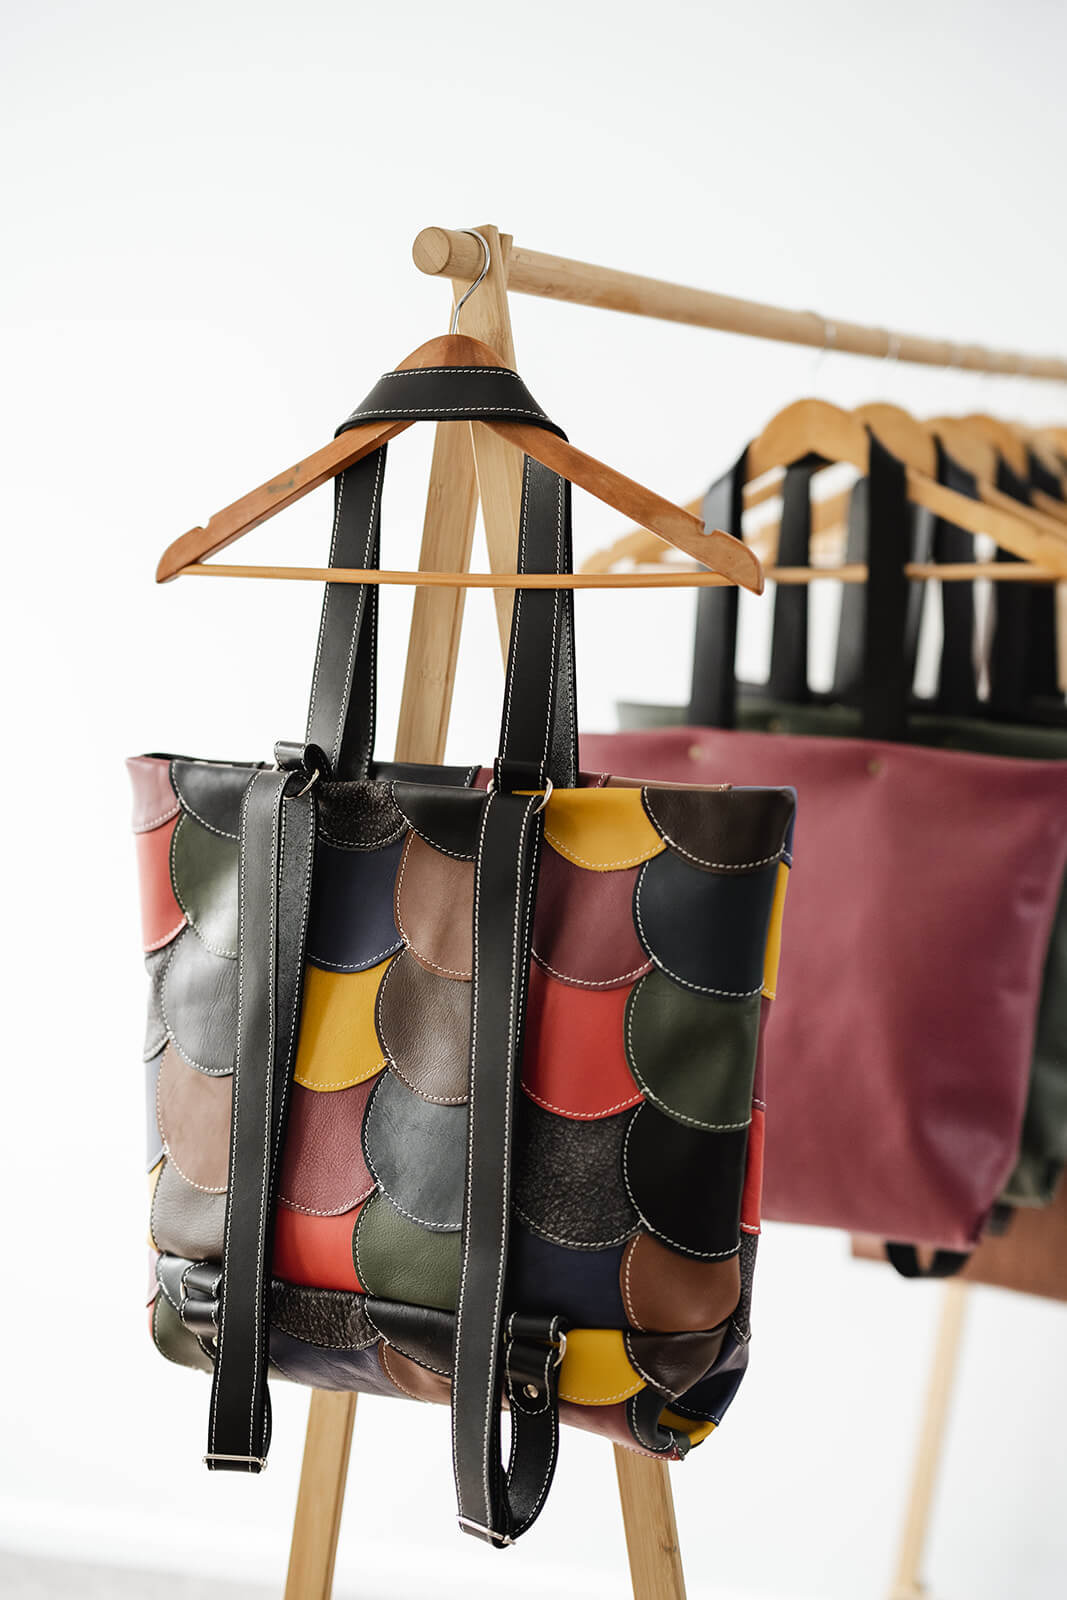 Timber clothes rack with white background. The front coat hanger has a colourful leather backpack and tote hanging as a tote and showing the backpack straps at the back. The bag is made of small circles of different coloured leather circles stitched together. It is The Circle Bag by Ella Jackson in Multicolour